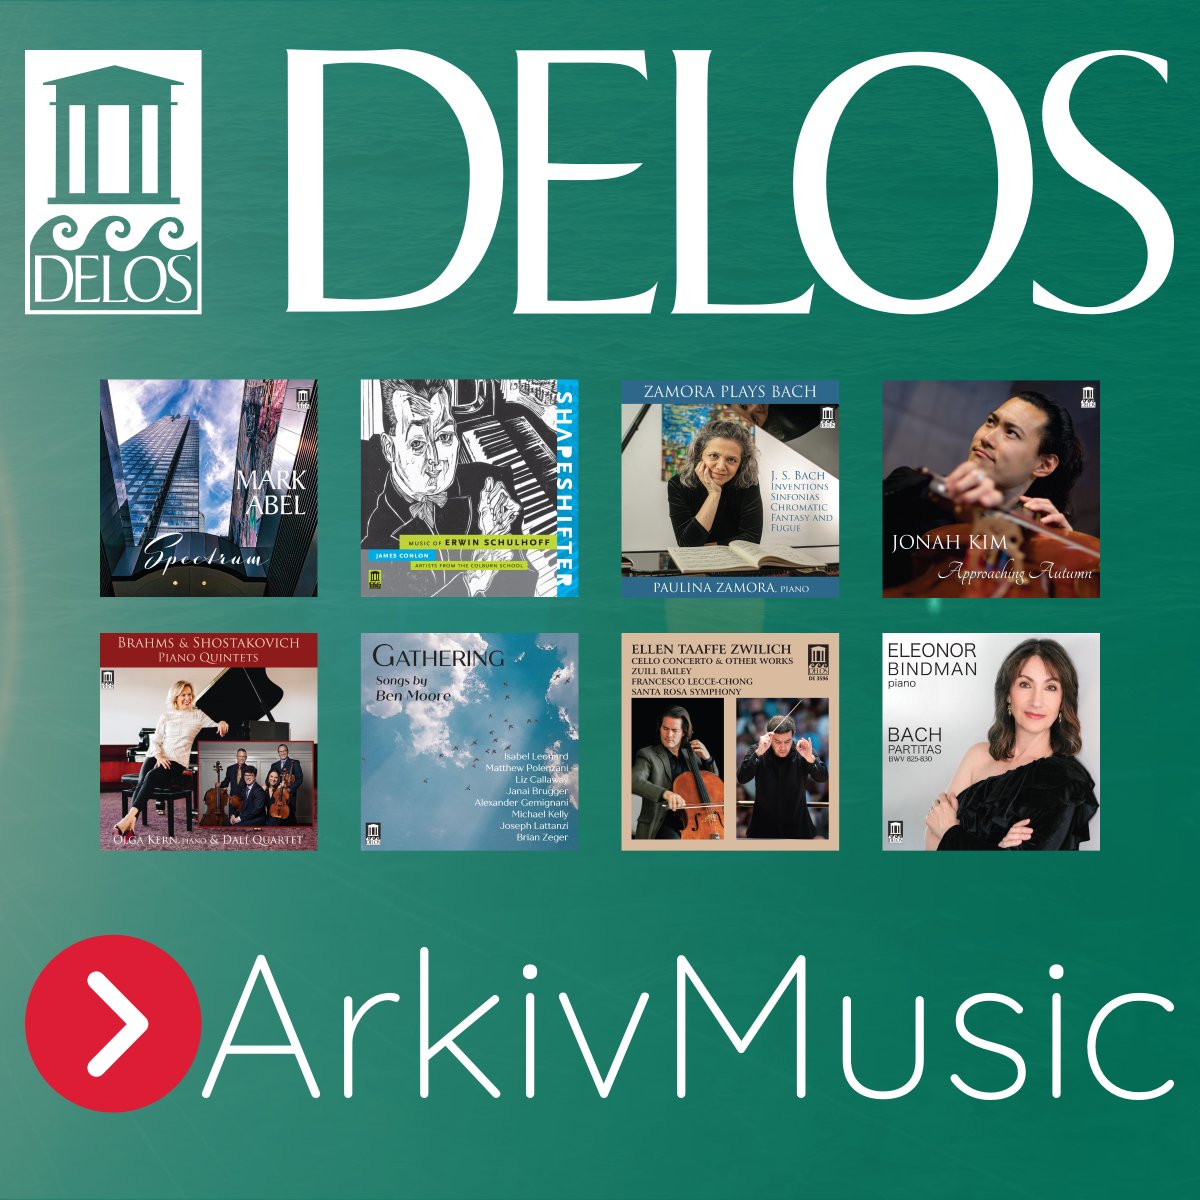 Welcome in the long holiday weekend with @ArkivMusic's Spring Sale! Some of our favorite releases on sale at deep discounts through Tuesday, April 9: bit.ly/3TW5TAv